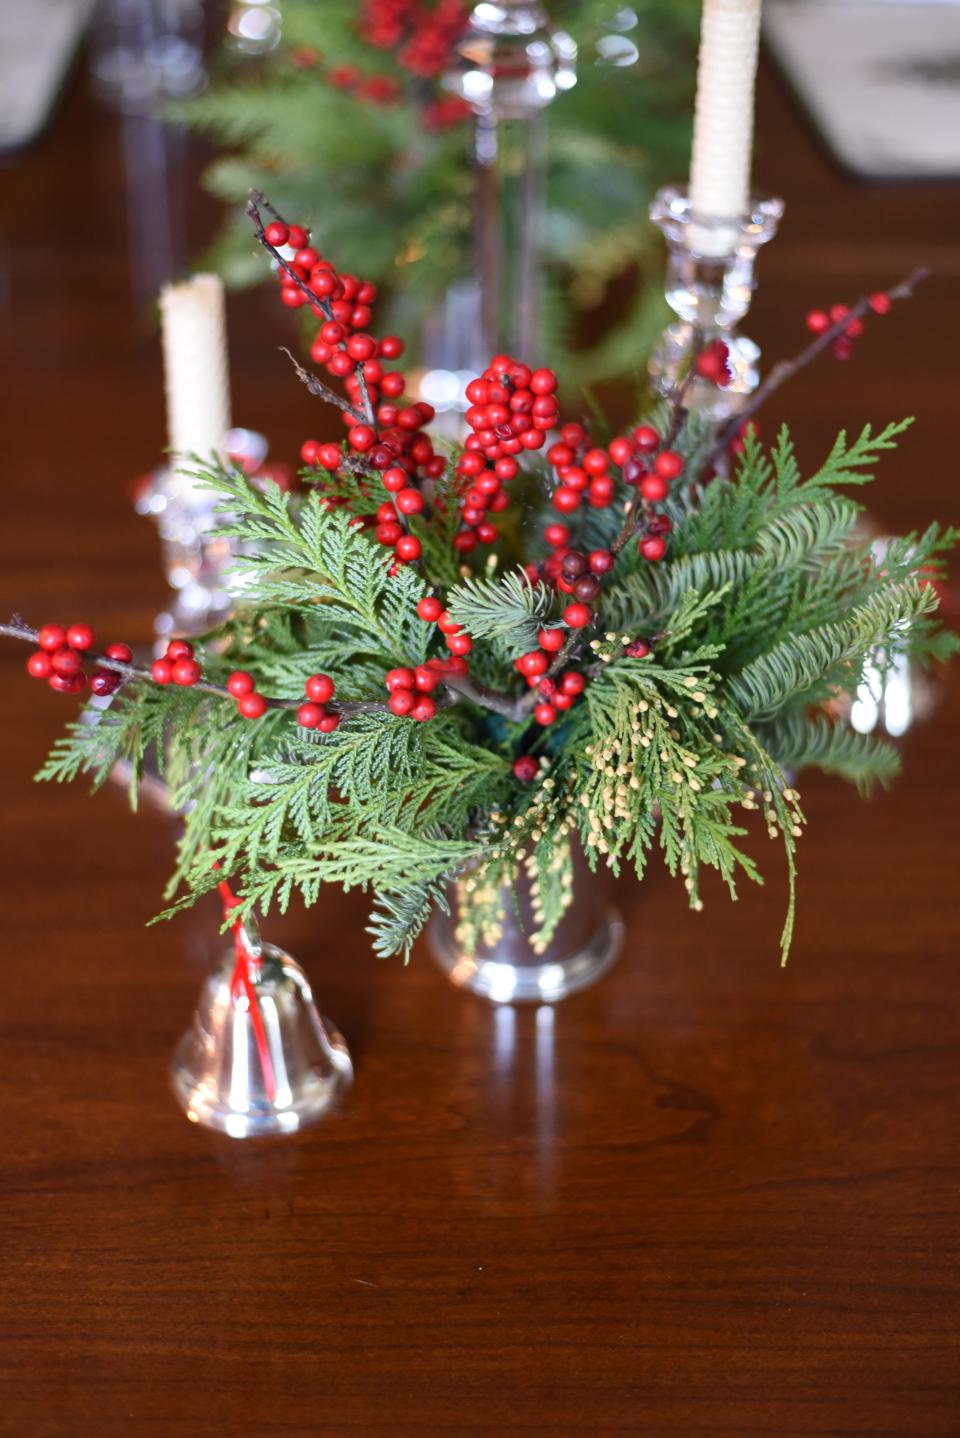 Cedar and winterberry holly make a nice combination when decorating for the holiday season.